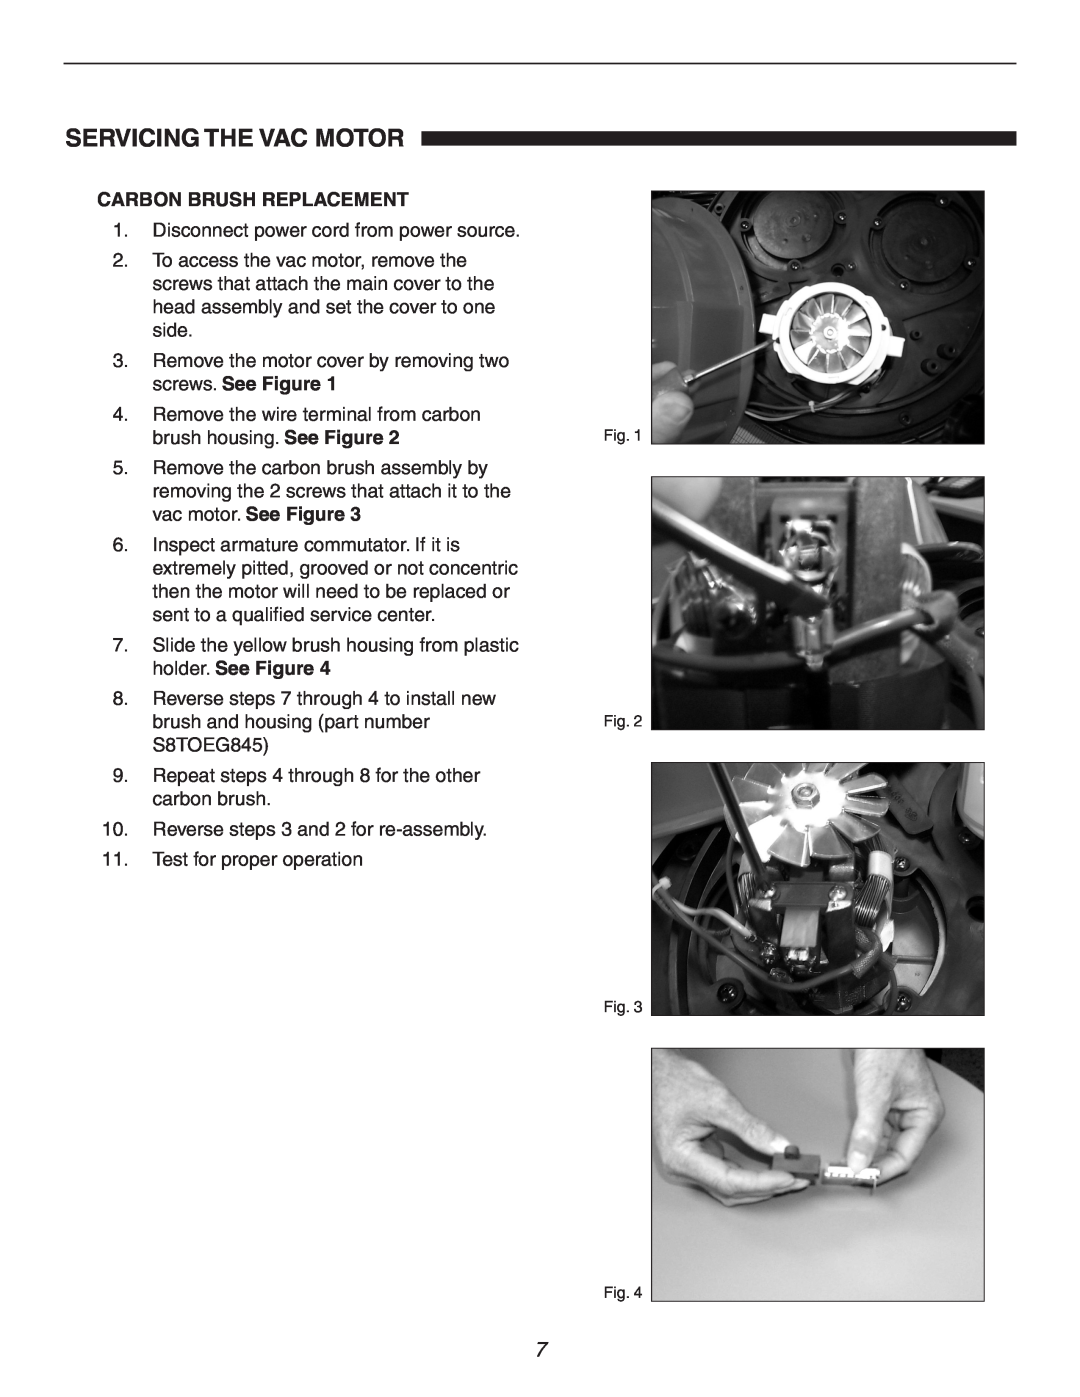 Century WDV16, WDV10 operating instructions Carbon Brush Replacement, Servicing The Vac Motor 